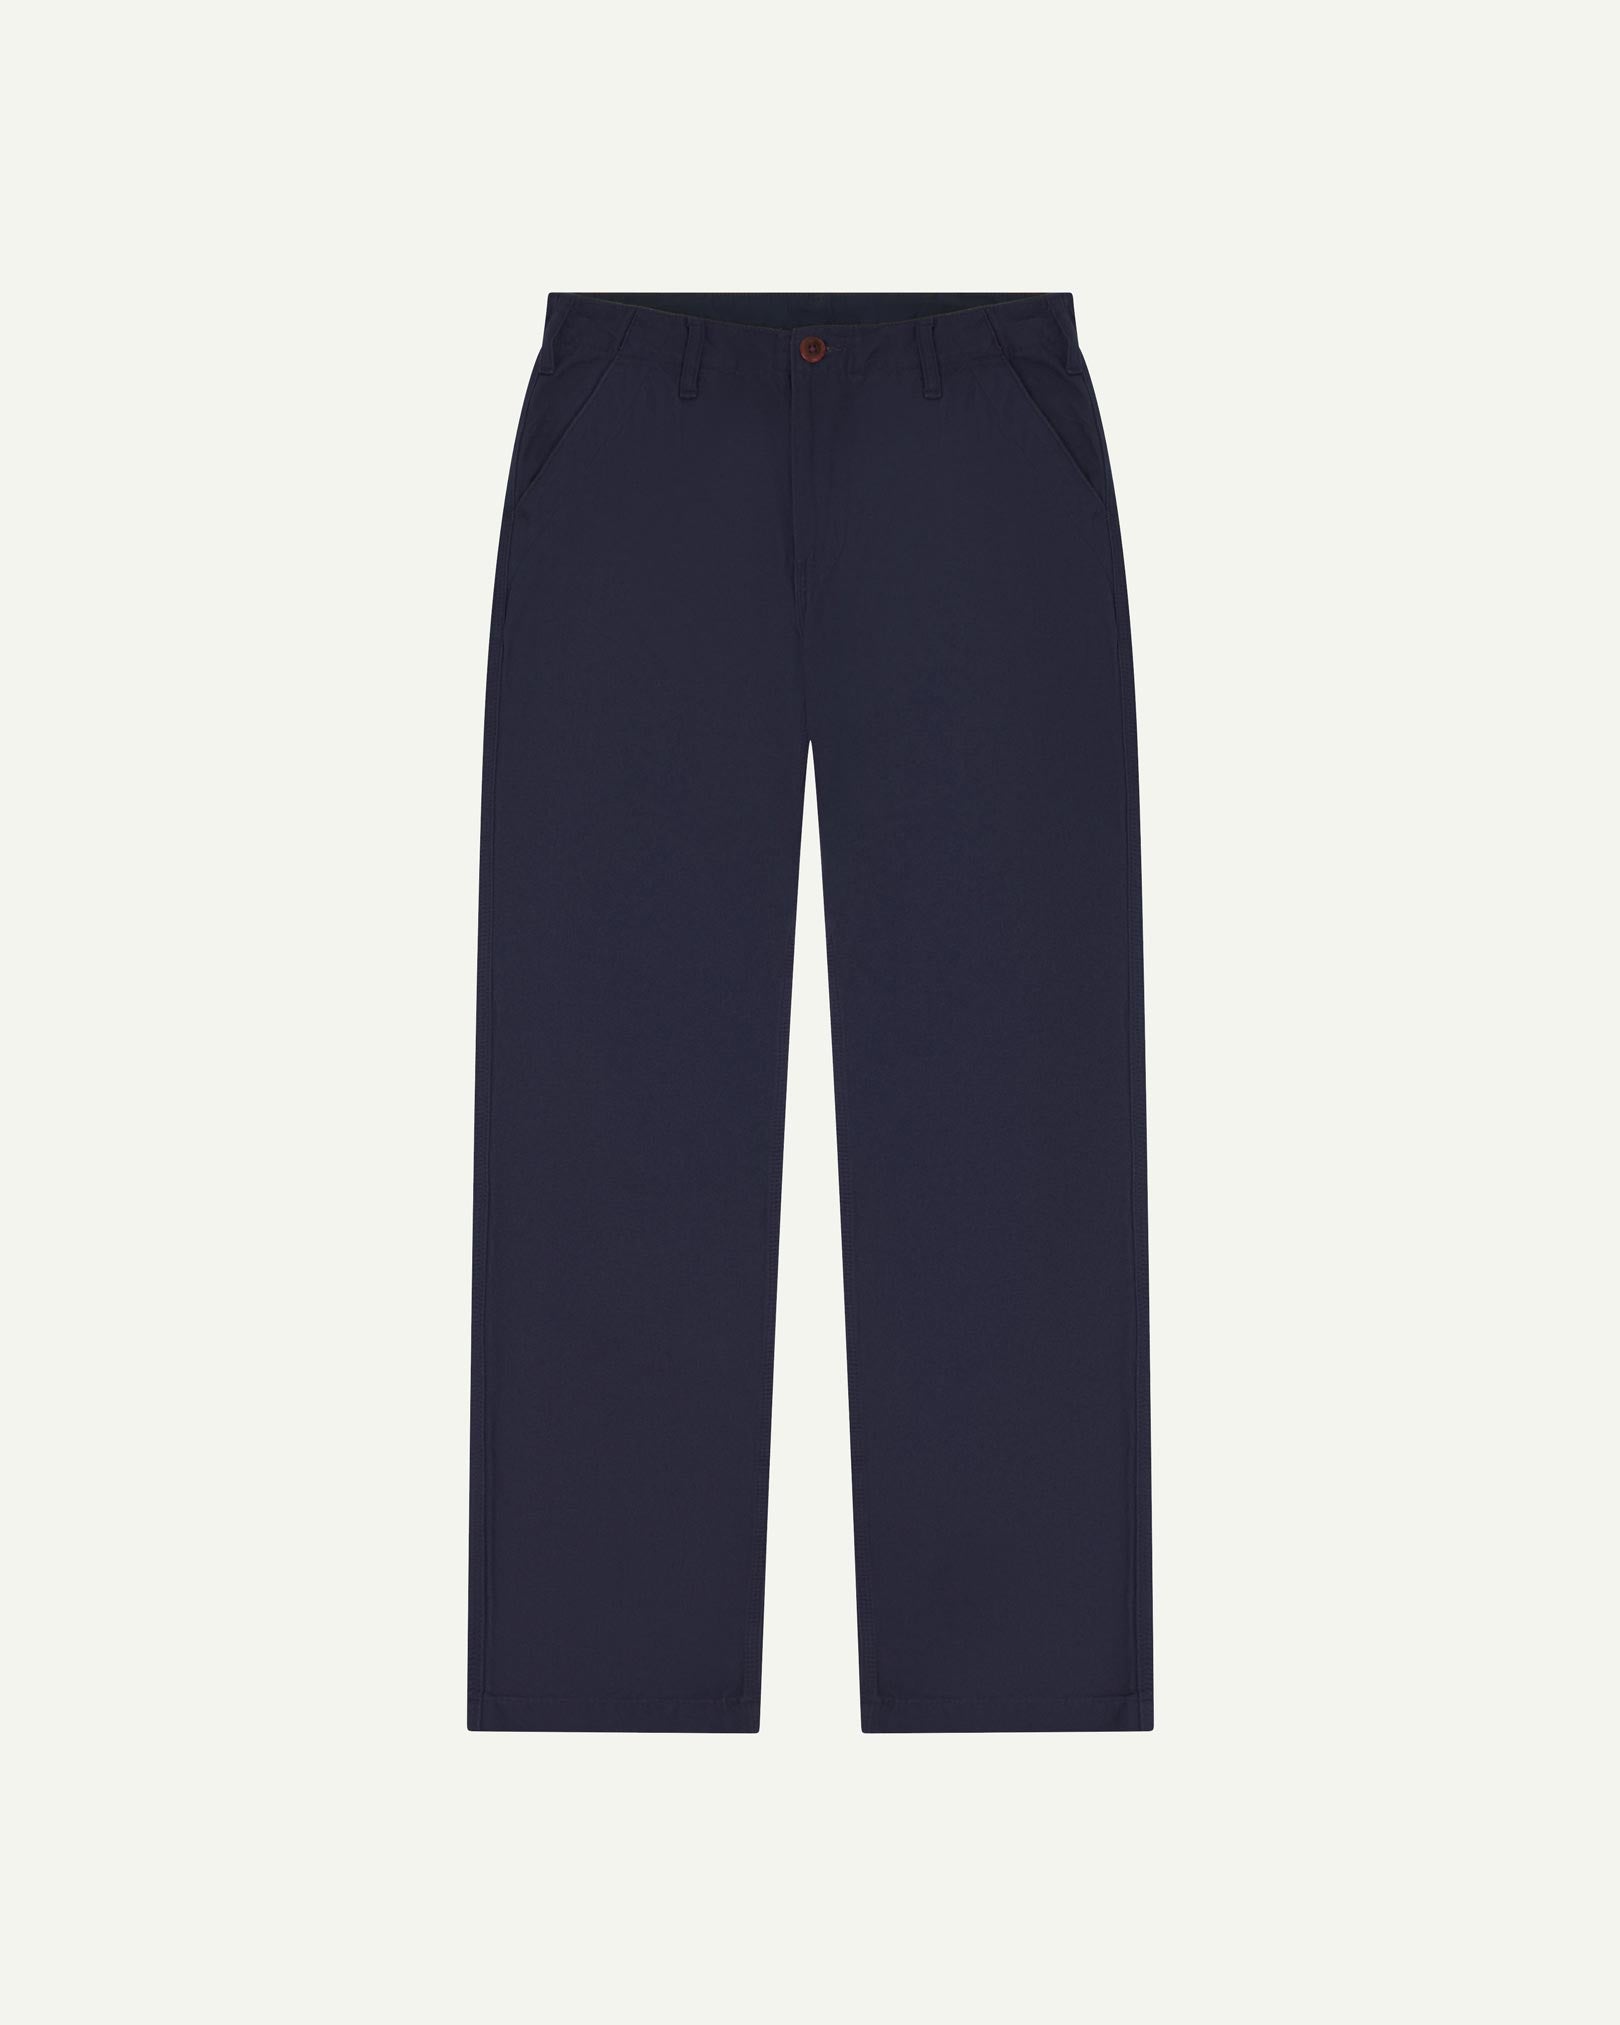 Front flat view of 5005 Uskees men's organic cotton midnight blue casual trousers with view of YKK zip fly and Corozo buttons.